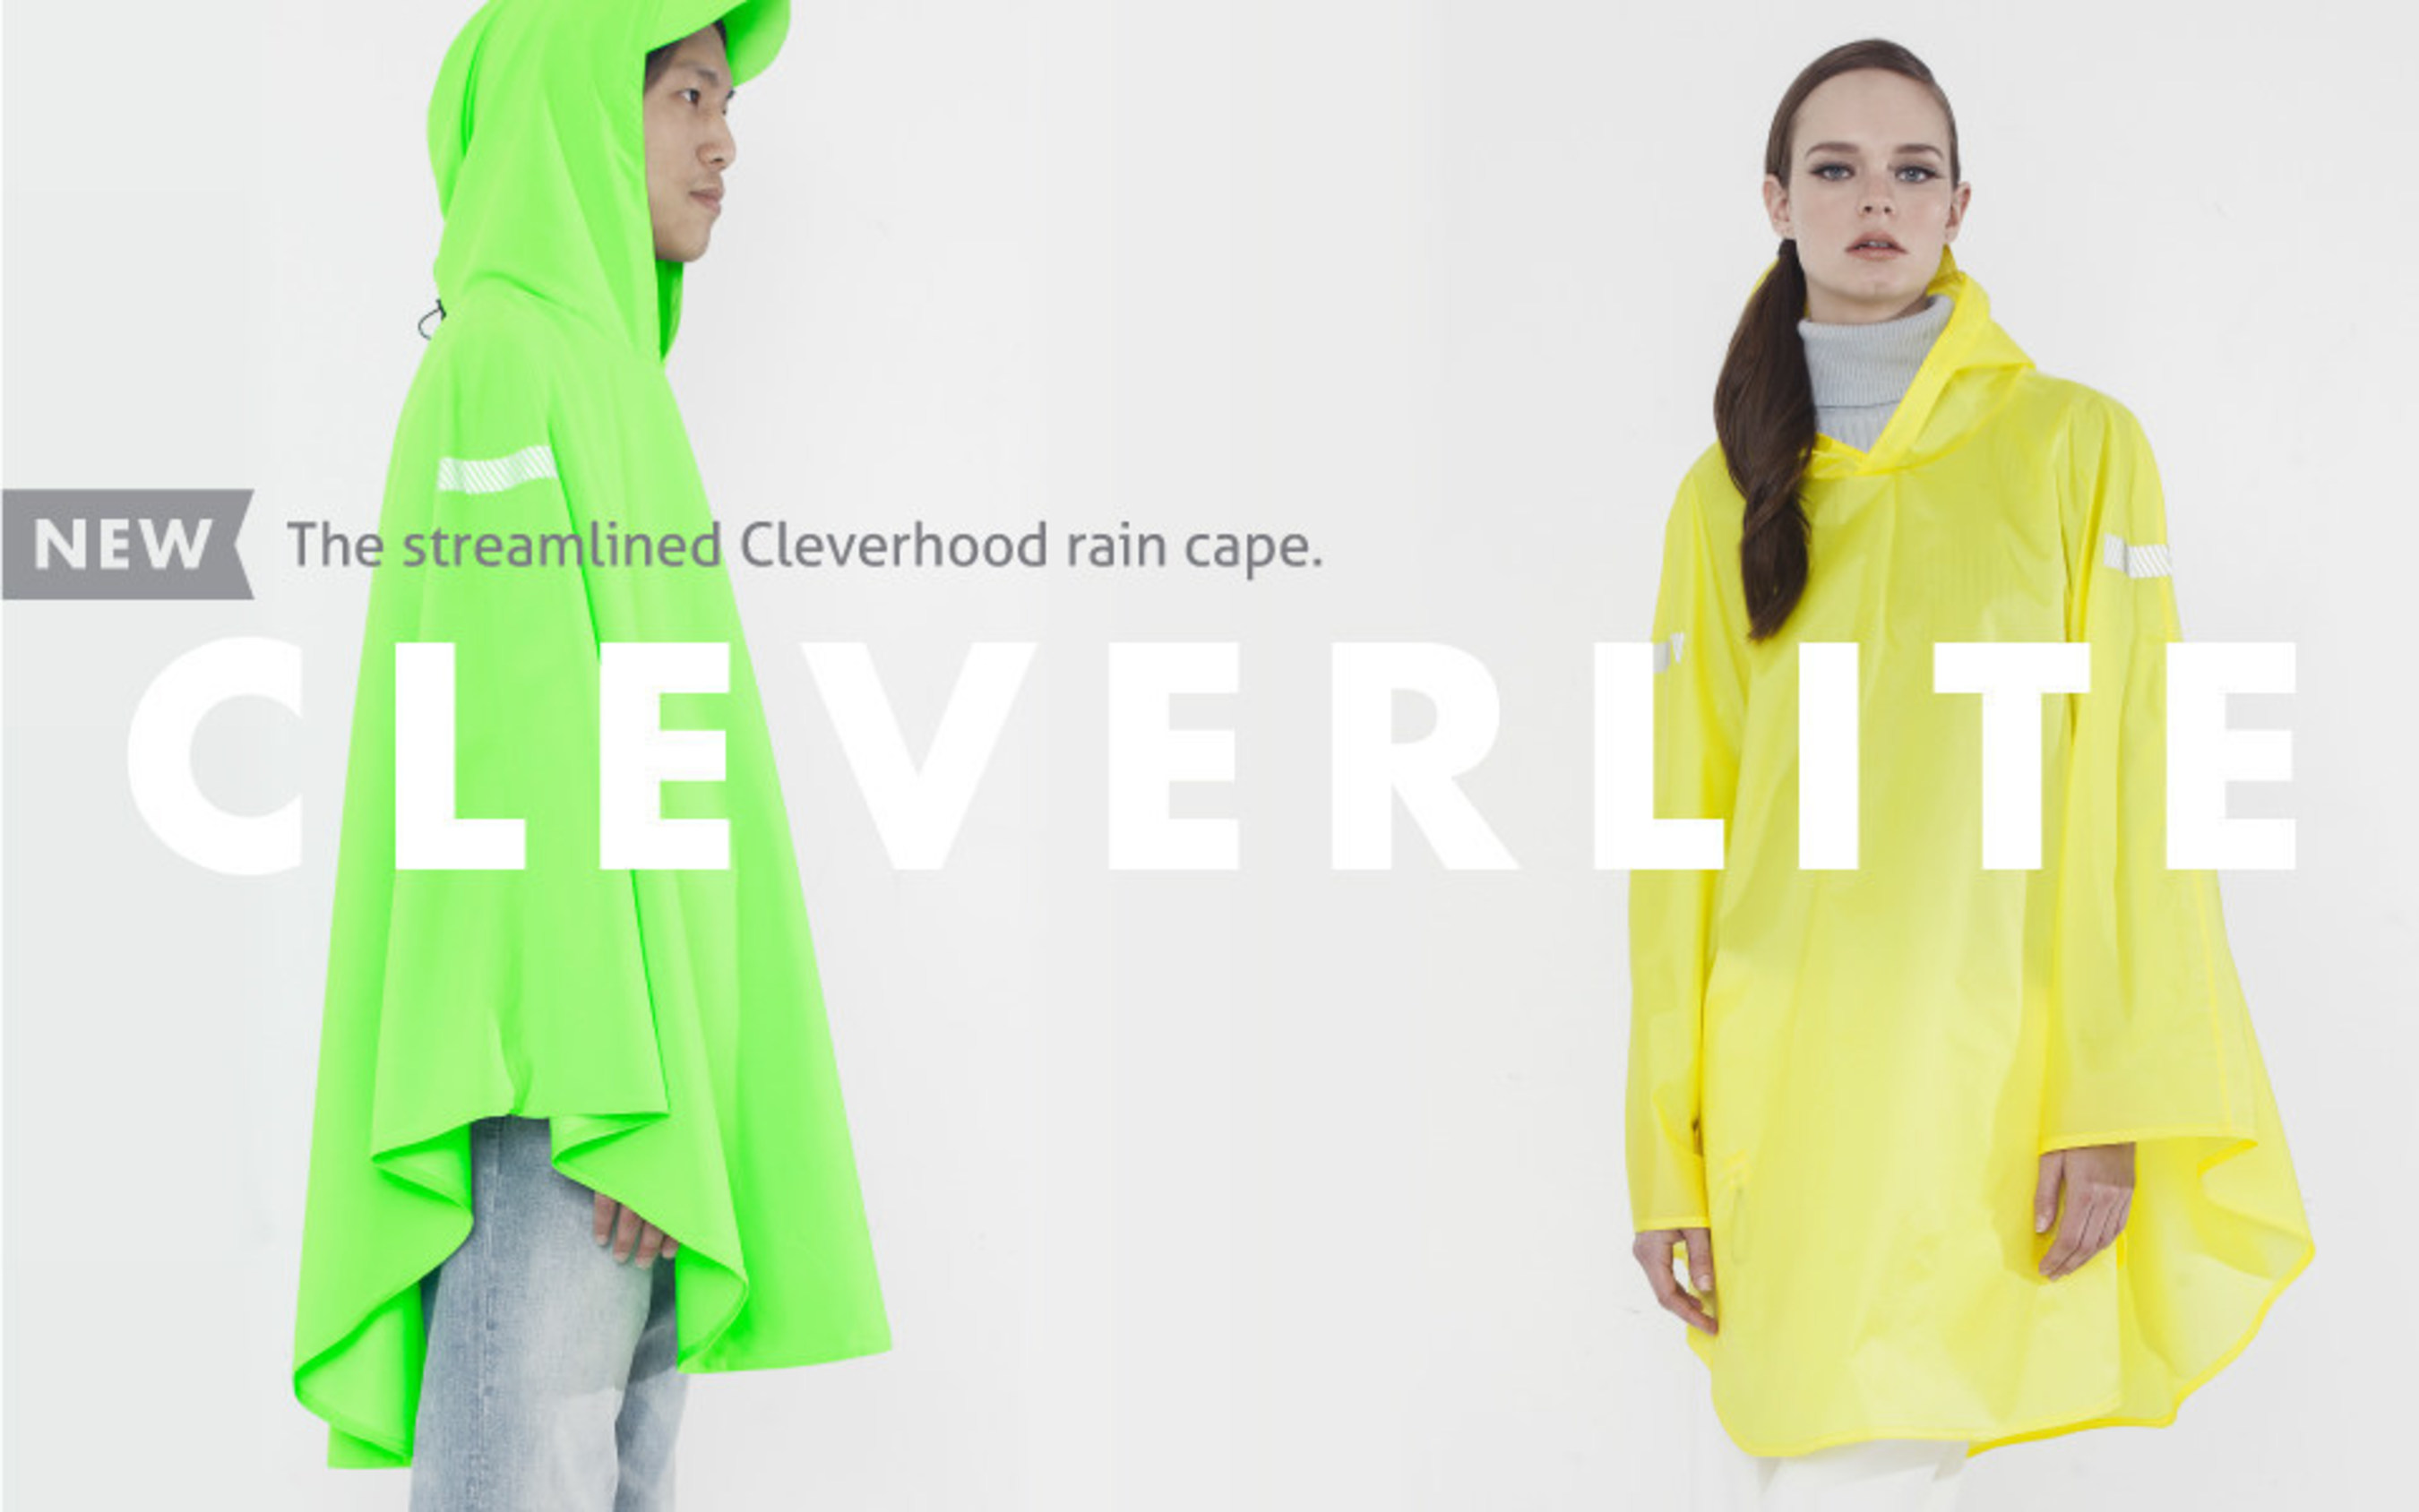 Cleverhood's new line of rain capes made in Fall River. Bike-ready for livable cities.